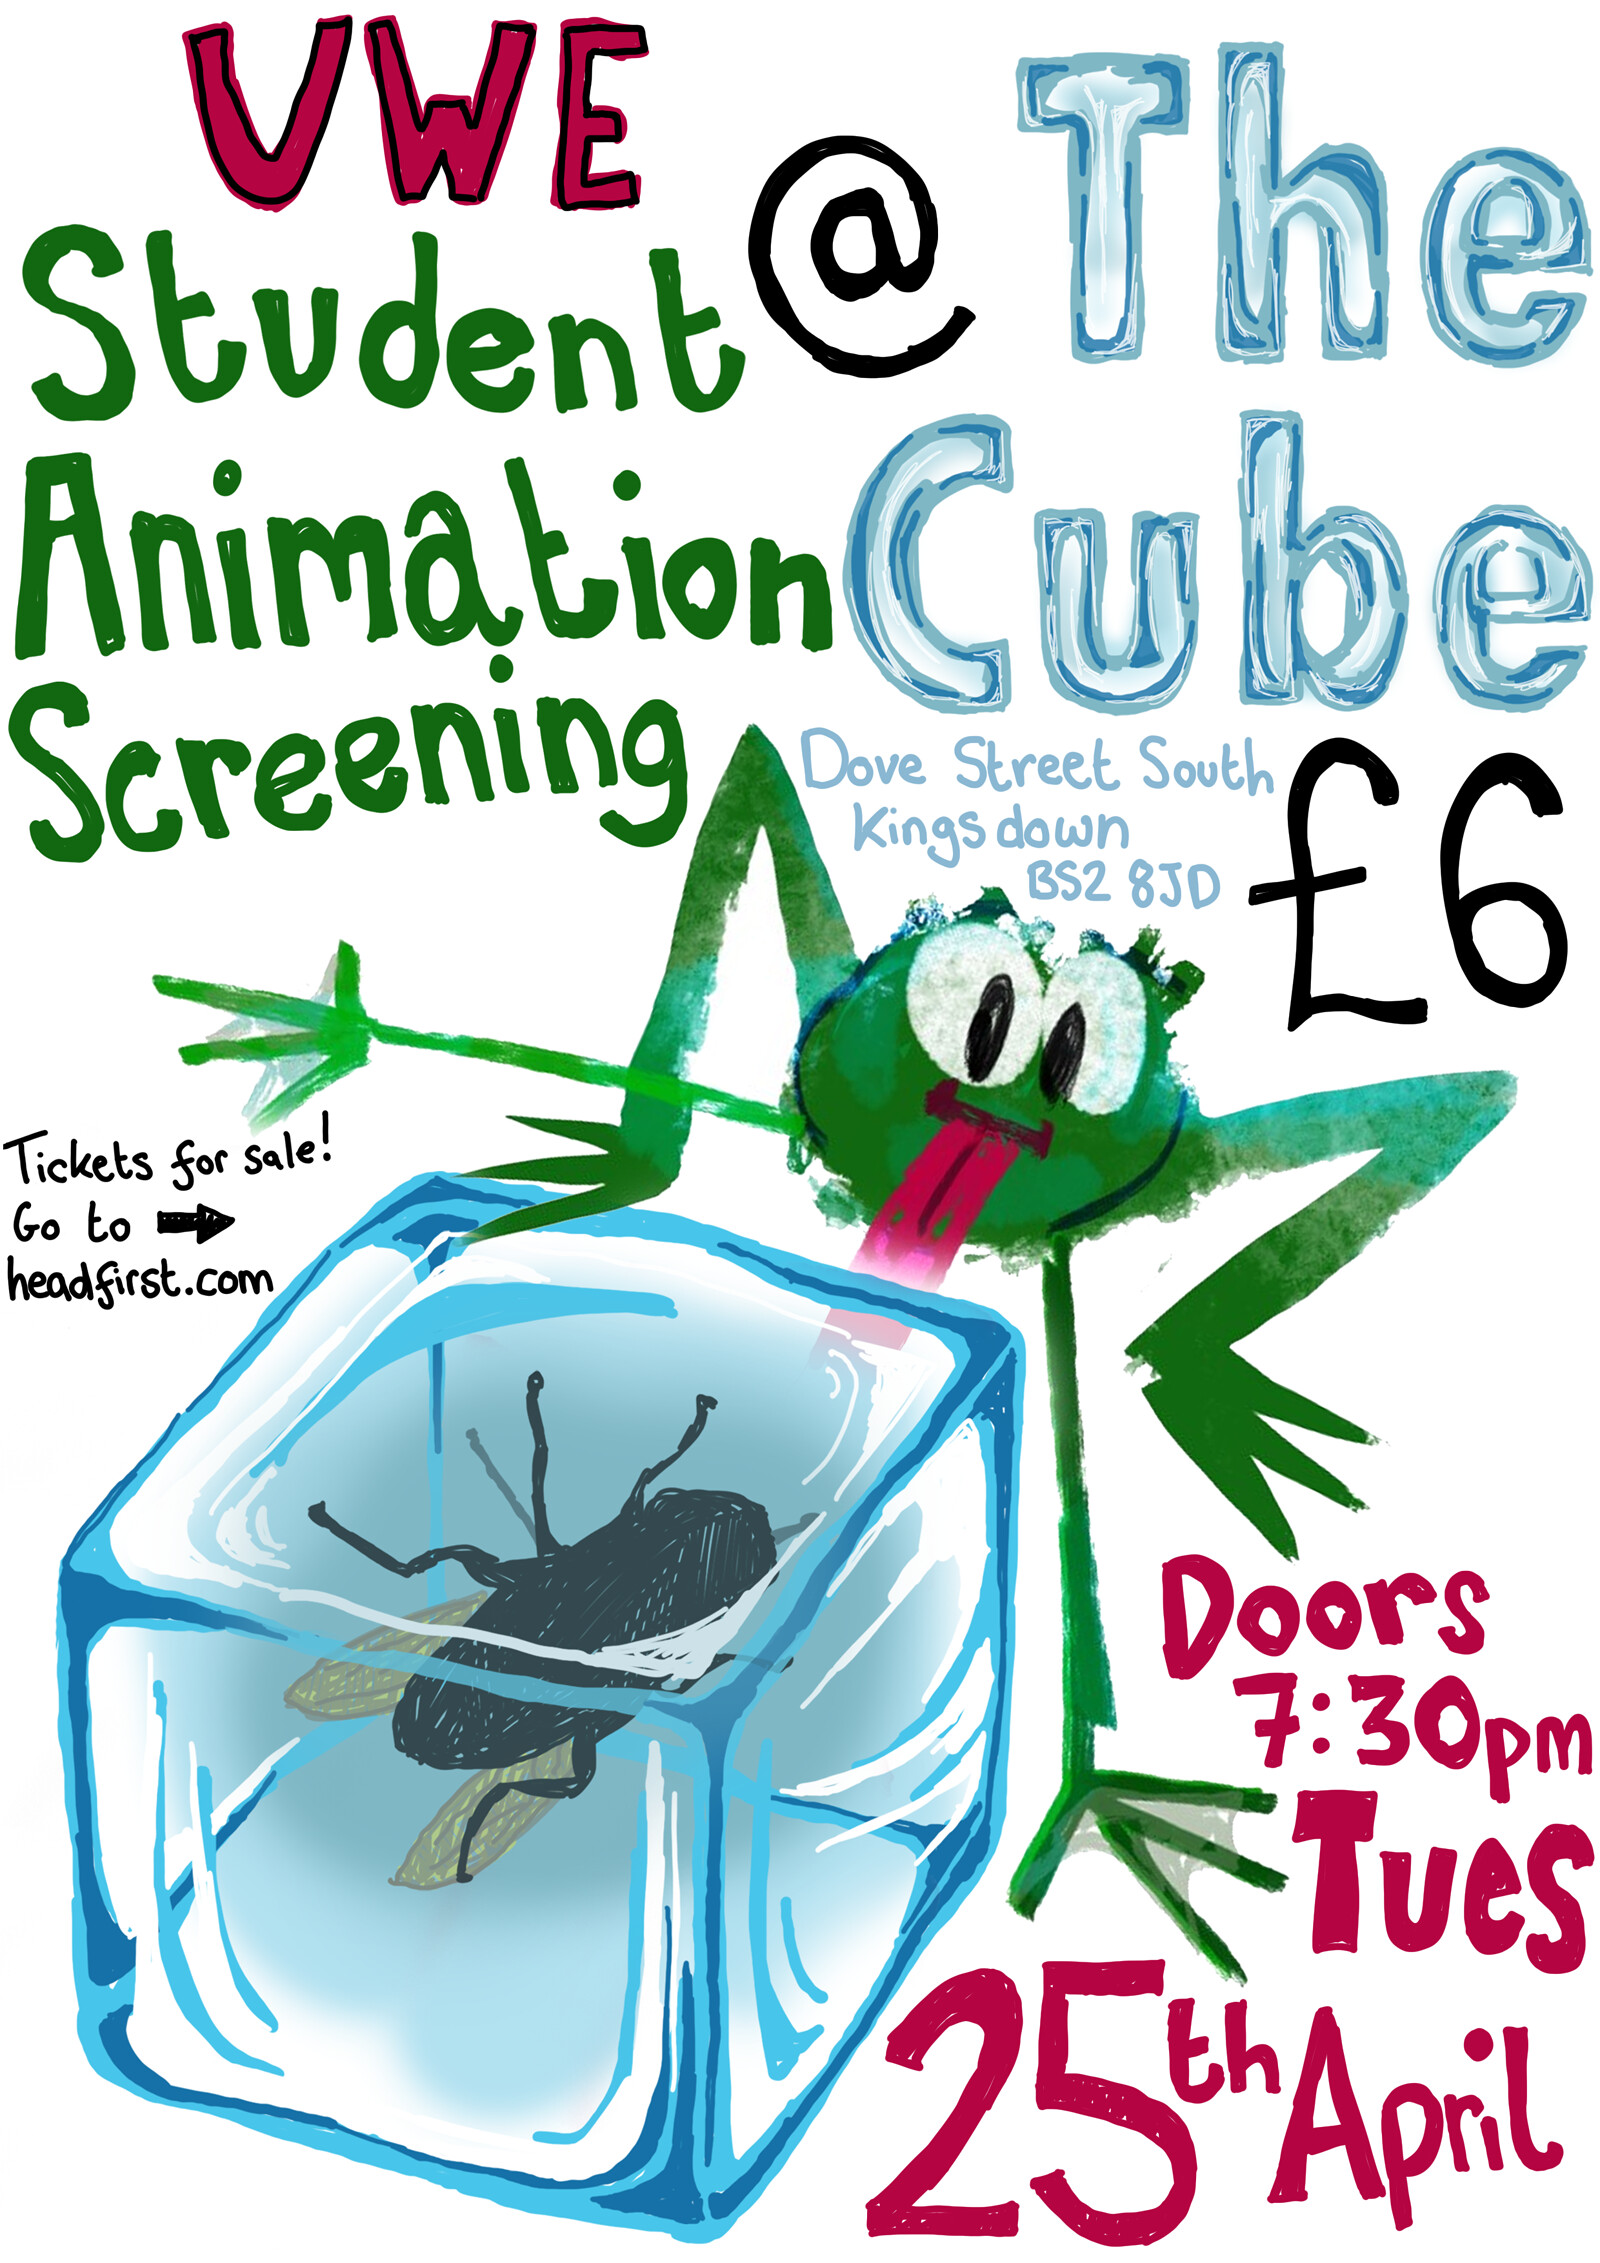 UWE Student Animation Screening at The Cube